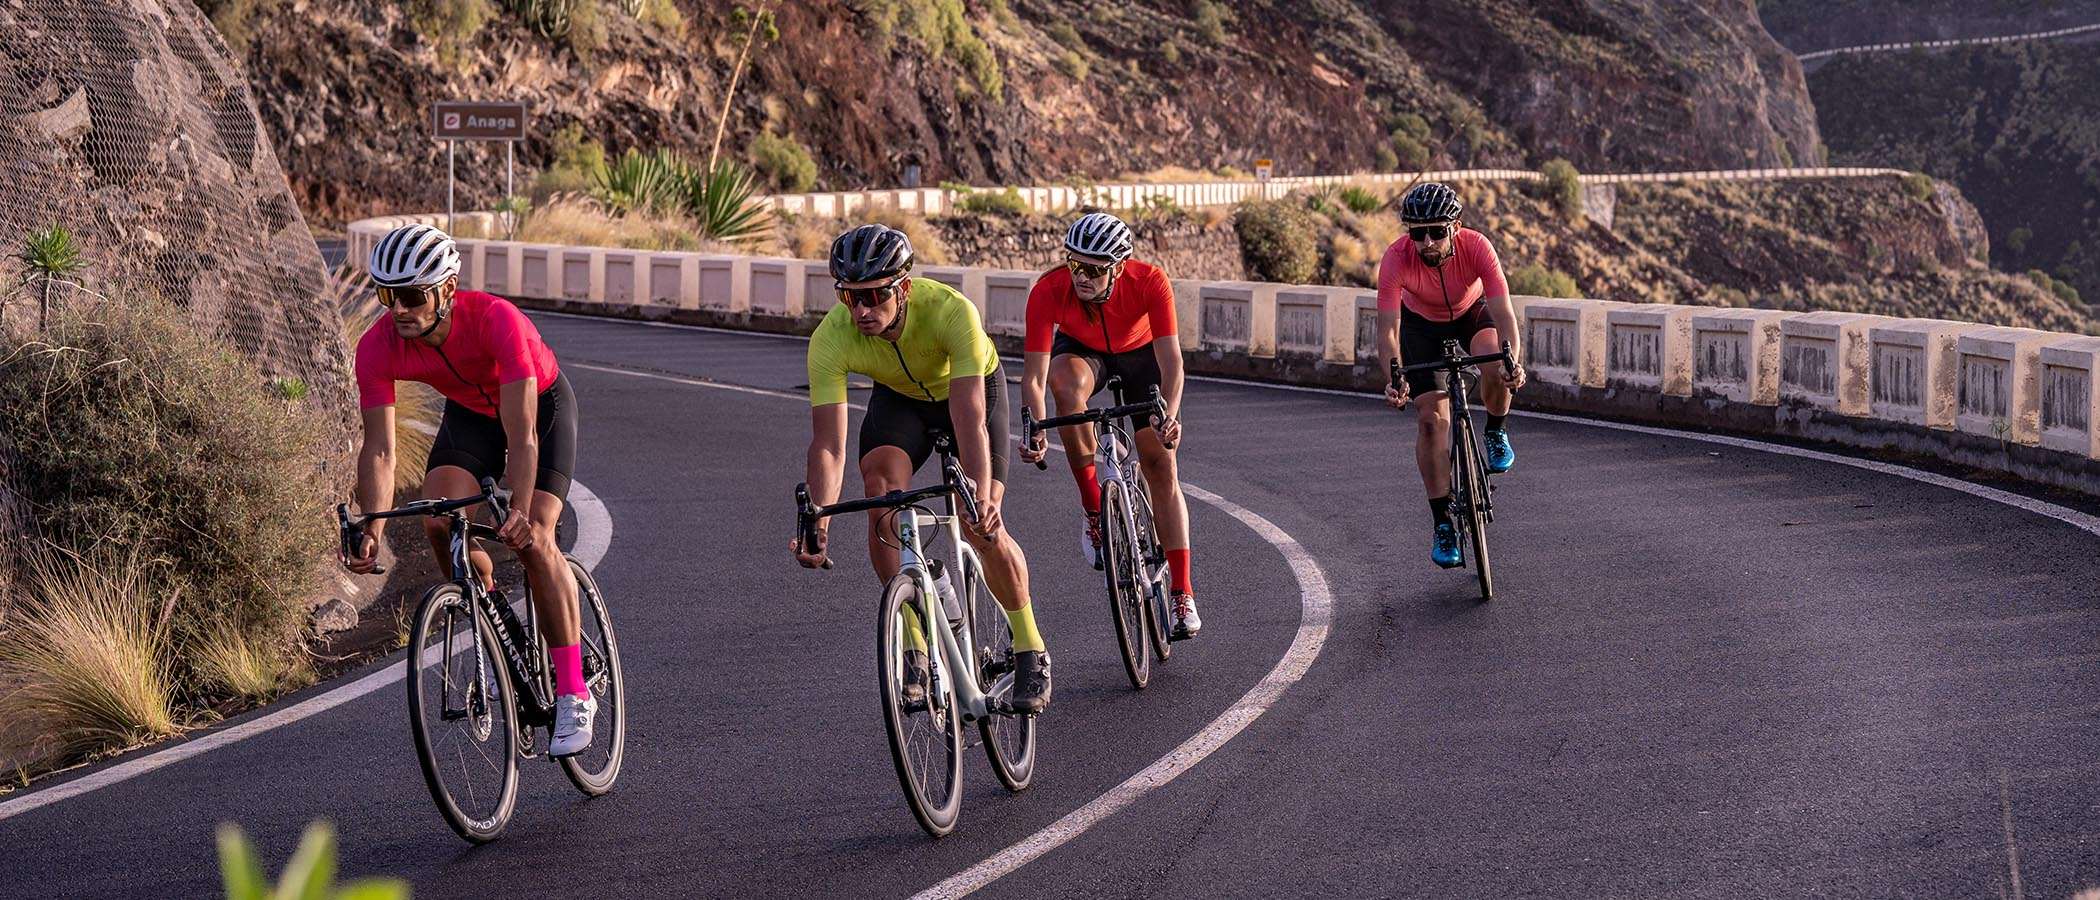 Roads in Anaga Park on Tenerife and cyclists riding